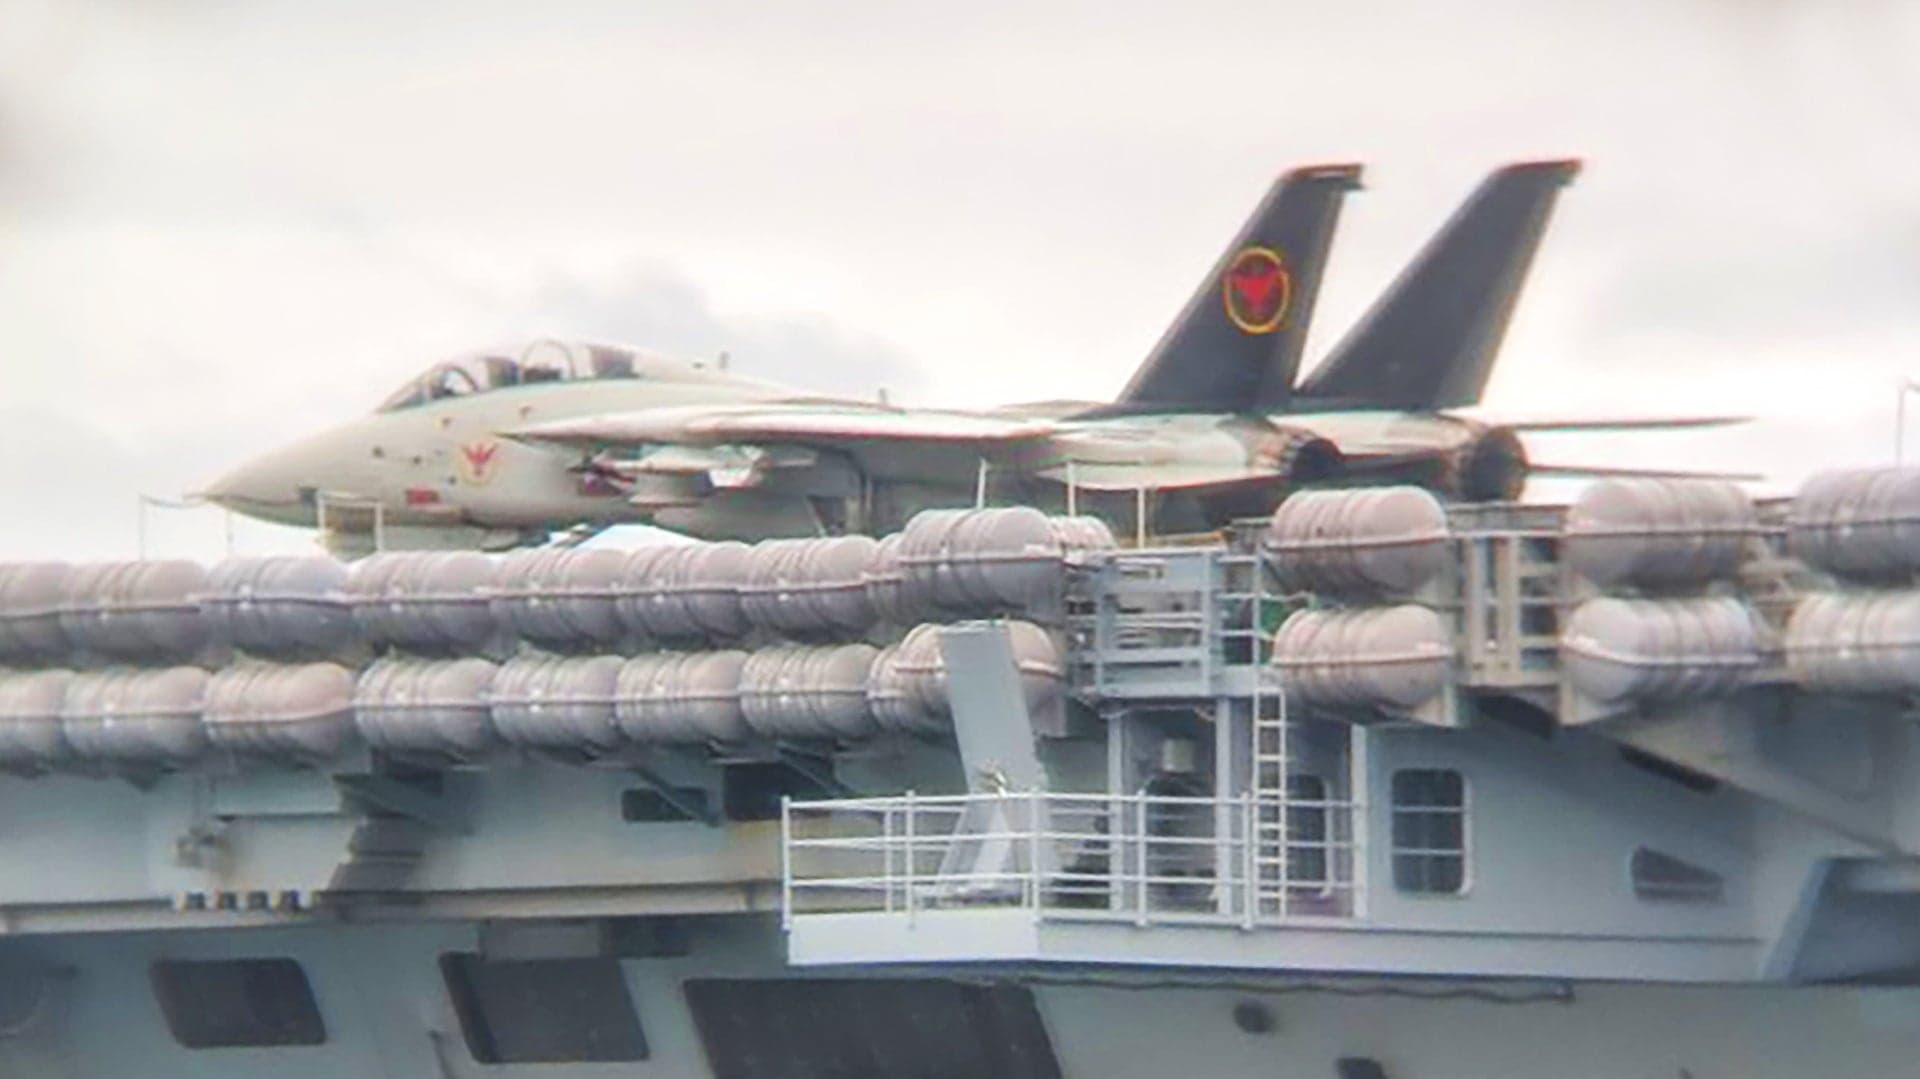 An F-14 Tomcat Has Returned To The Deck Of An Operational Carrier For Top Gun 2 Production